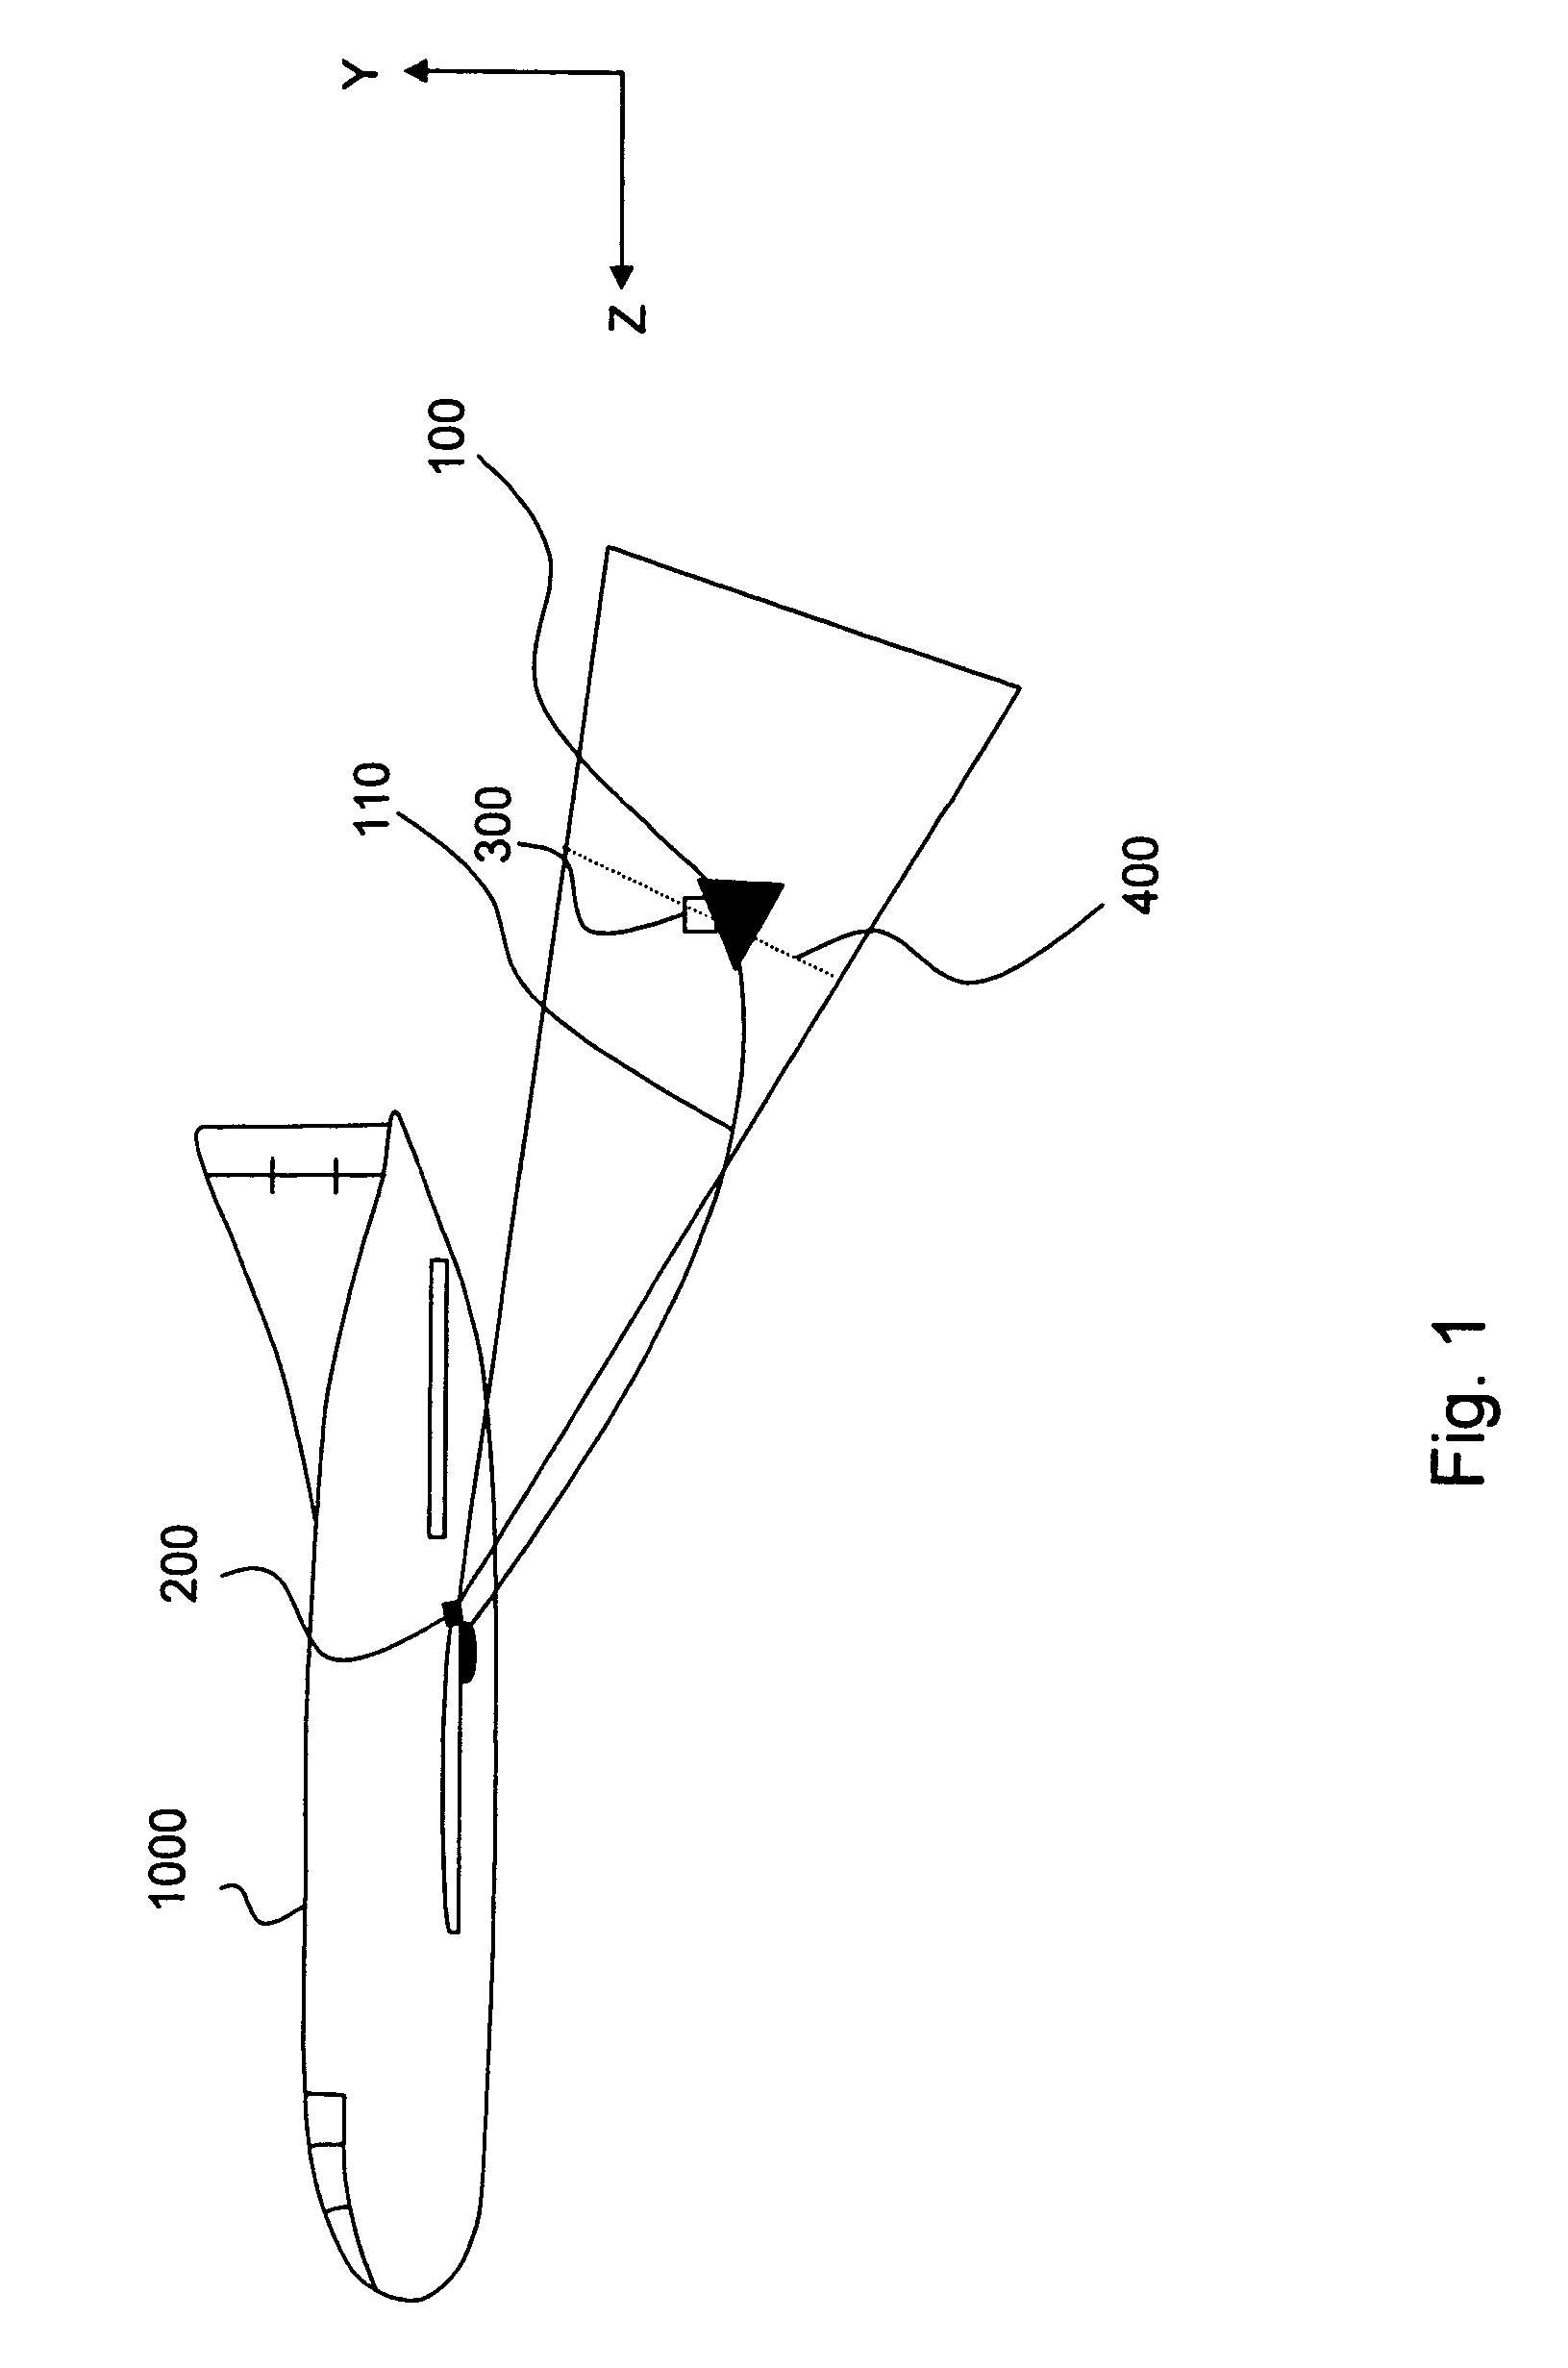 Optical tracking system for refueling